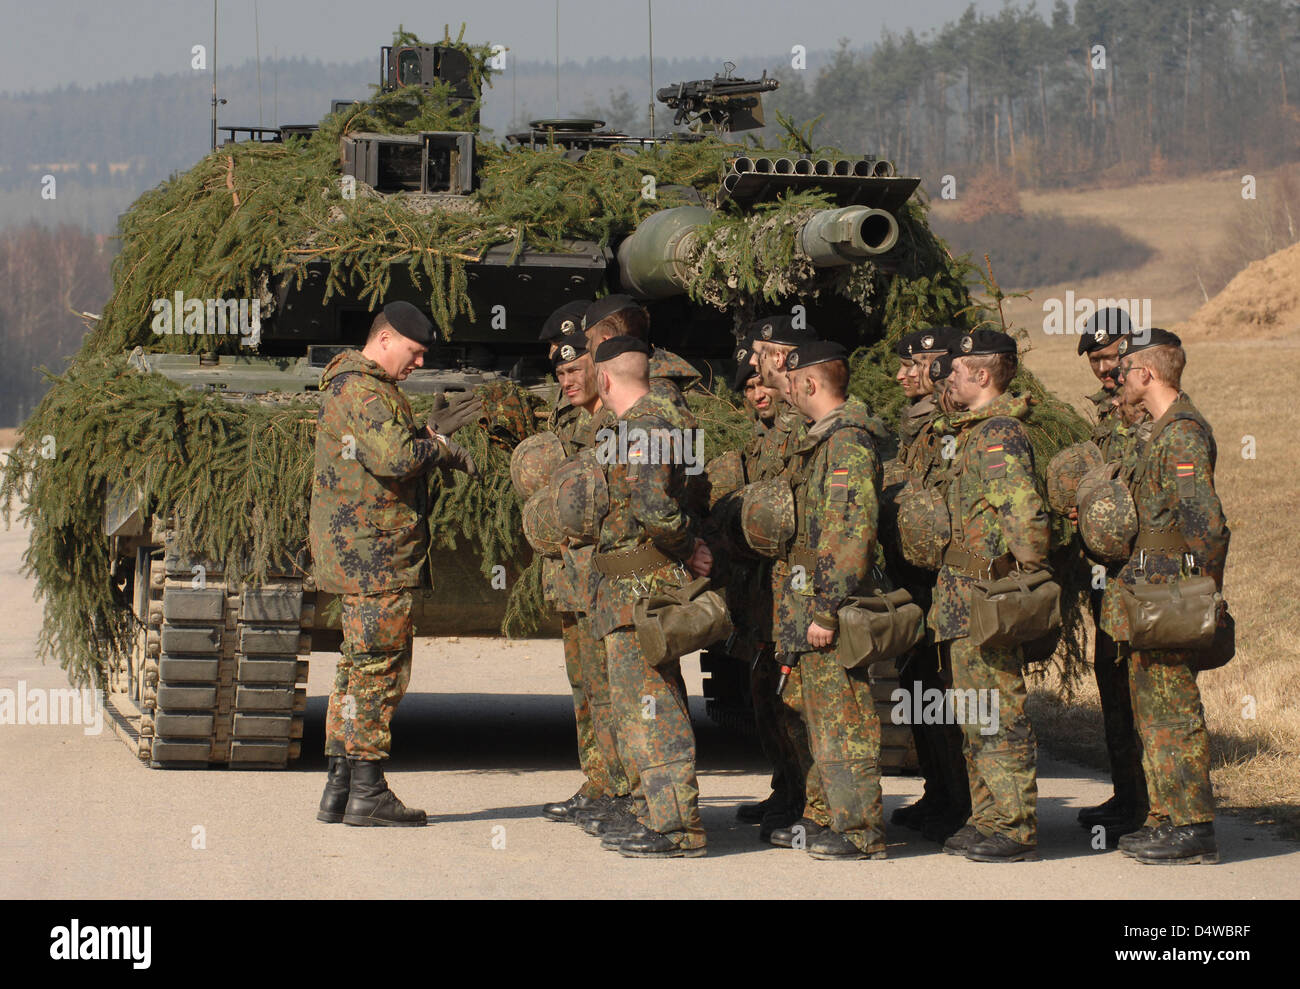 (FILE) - A file picture dated 26 February 2008 shows soldiers of the tank battalion 104 in front of a Leopard II A6 main battle tank in Pfreimd, Germany. According to information released by the daily 'Leipziger Volkszeitung', the Christian Democratic Union (CDU) and Christian Social Union (CSU) plan on downsizing the German Armed Forces to about 185,000 to 190,000 soldiers, from c Stock Photo